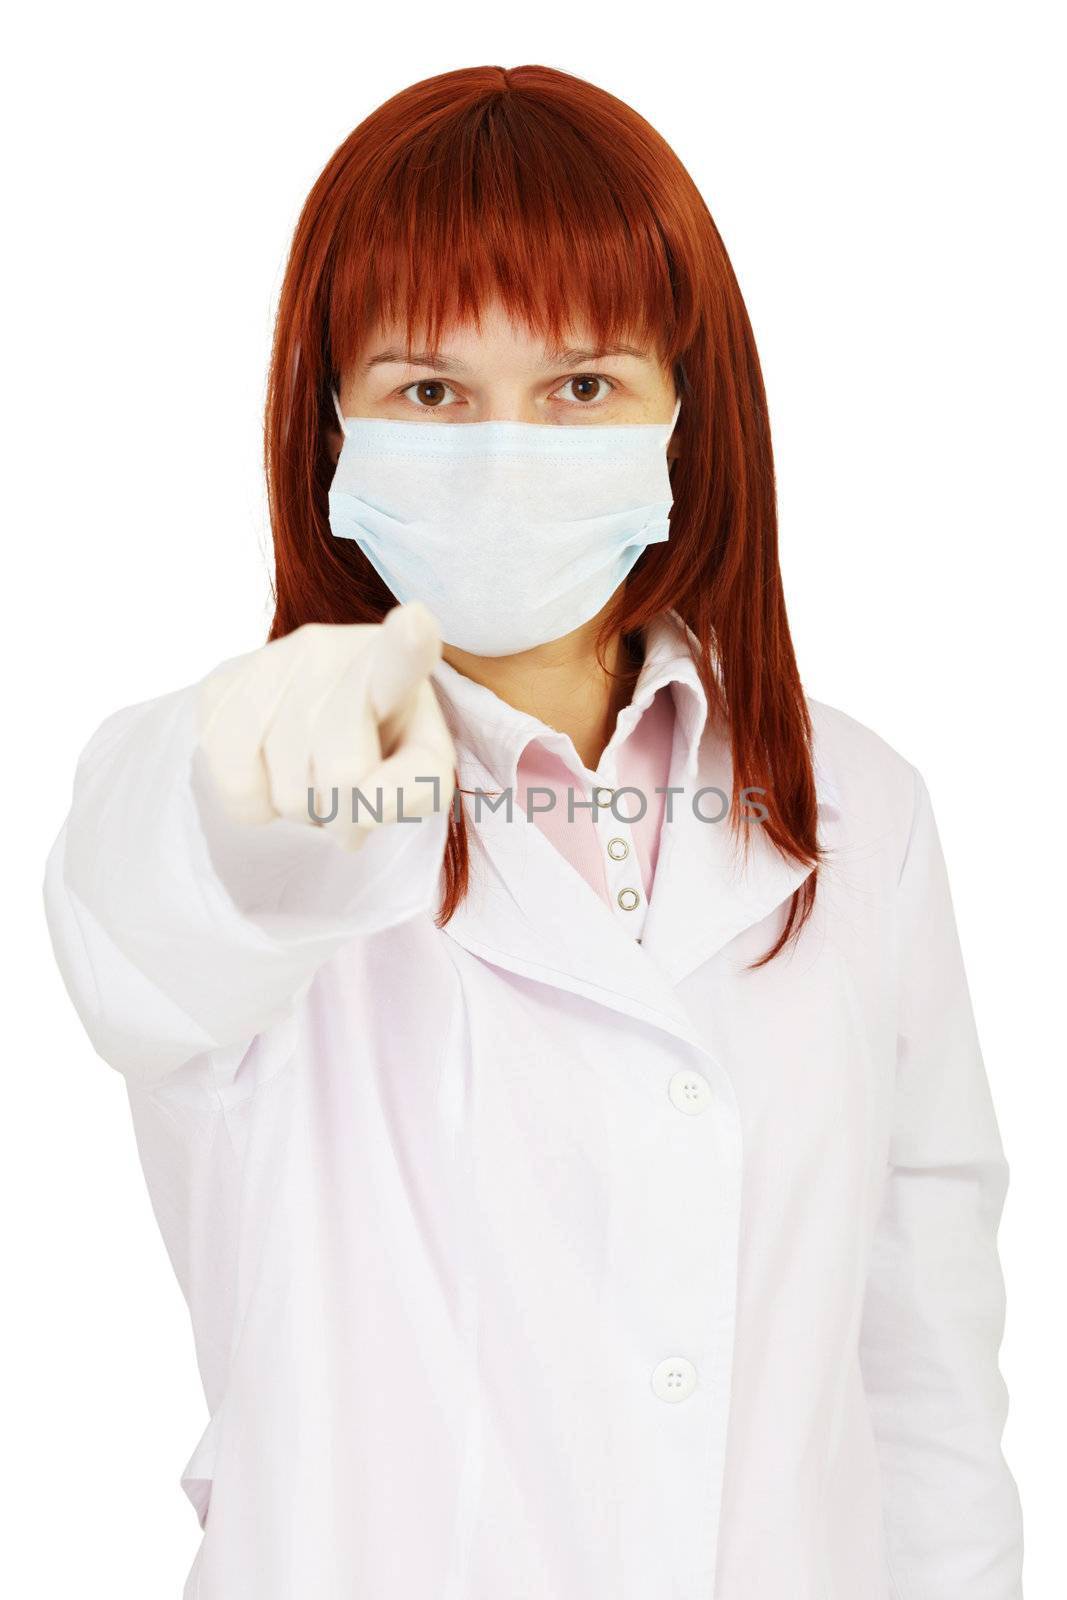 The staff nurse points a finger at us on white